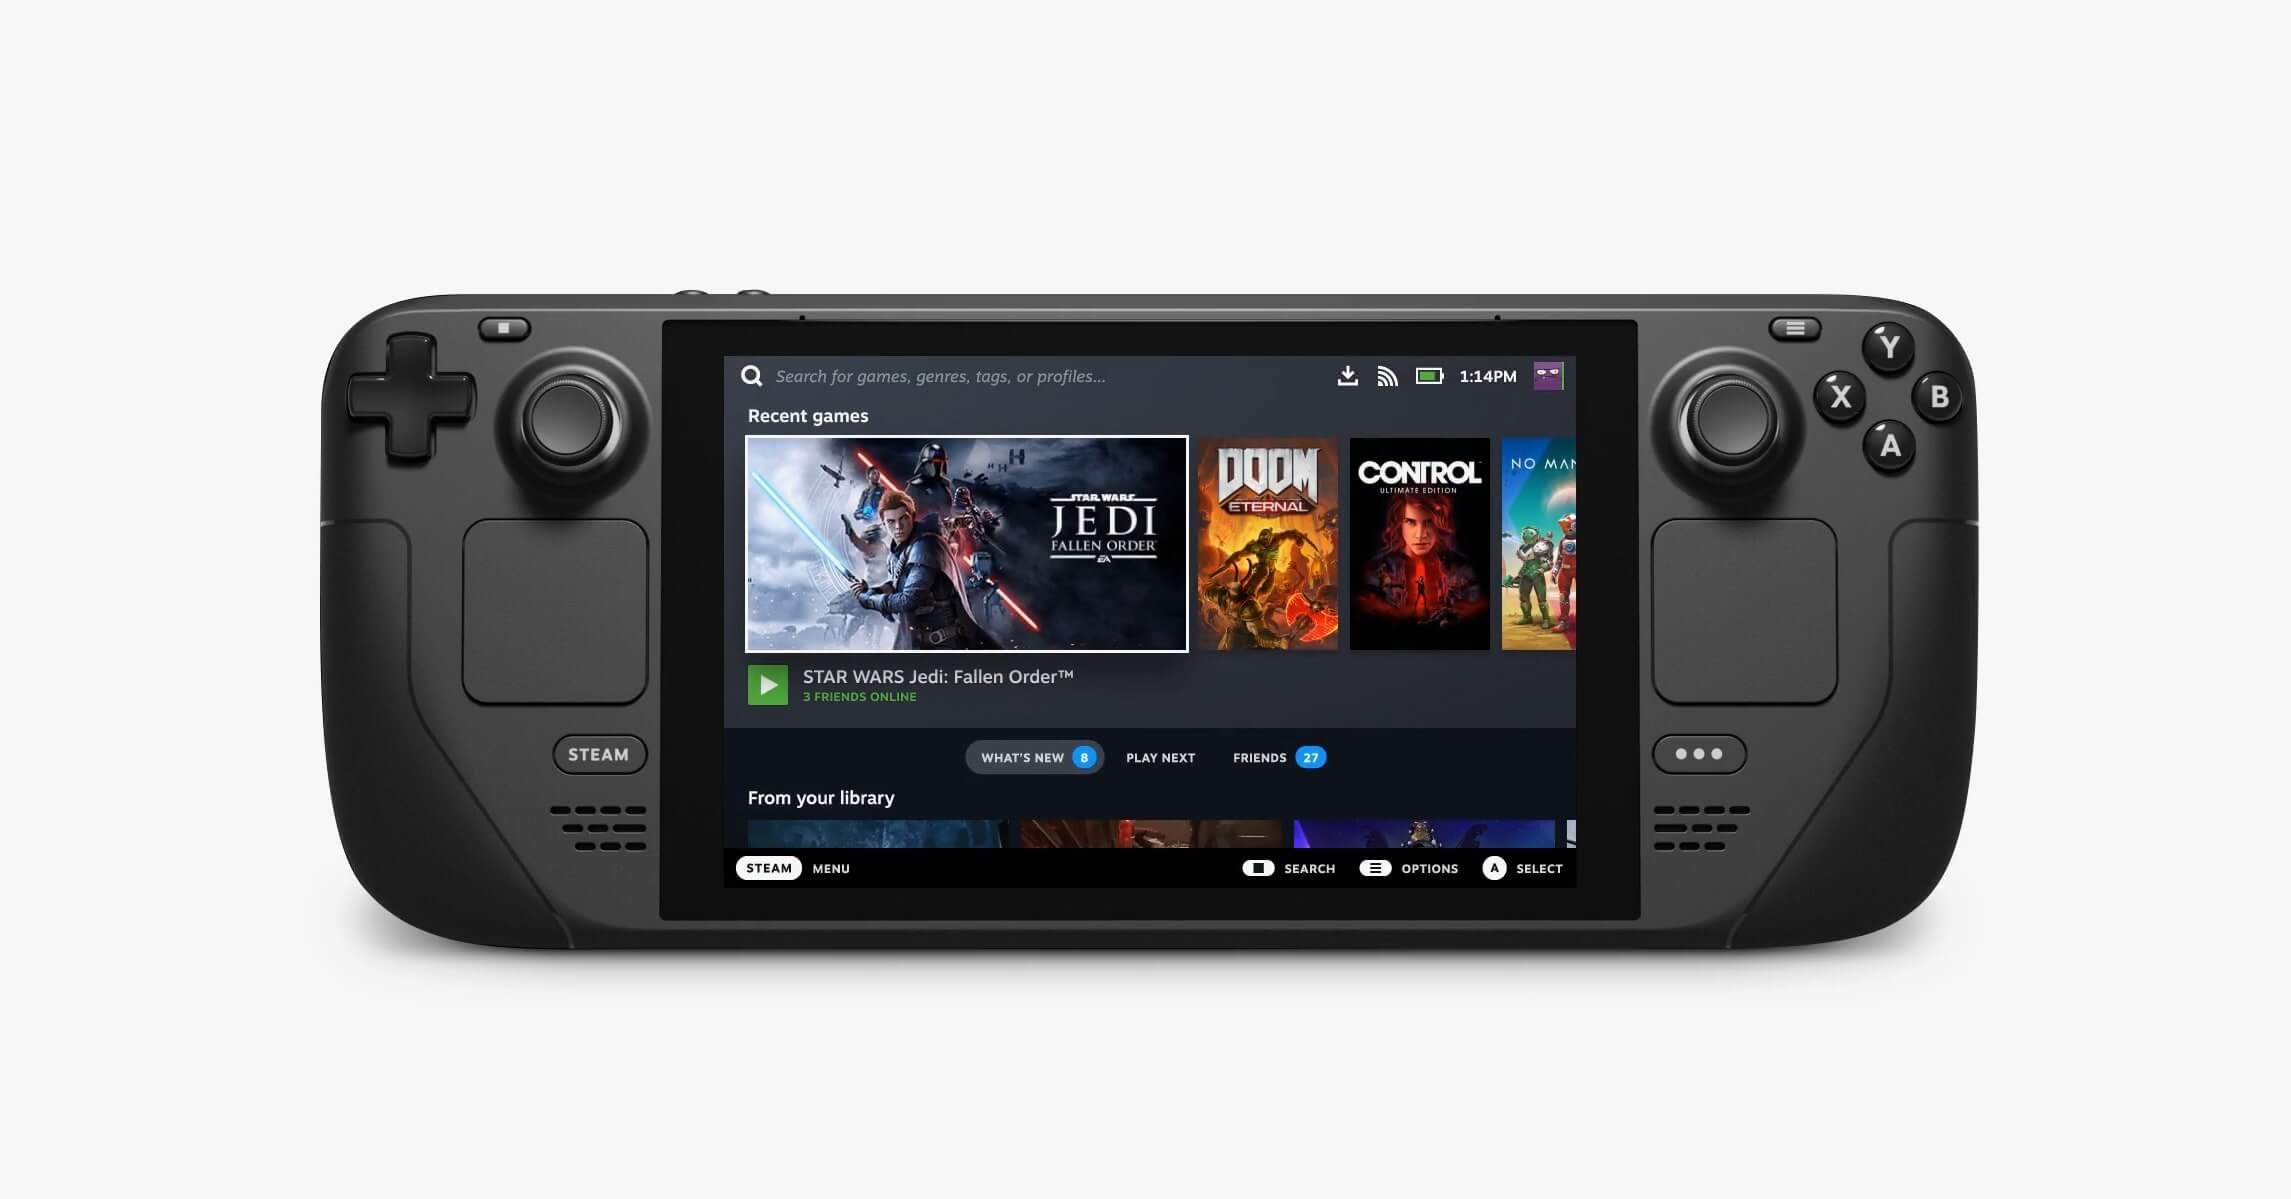 Valve has announced Steam Deck, a new gaming handheld PC device